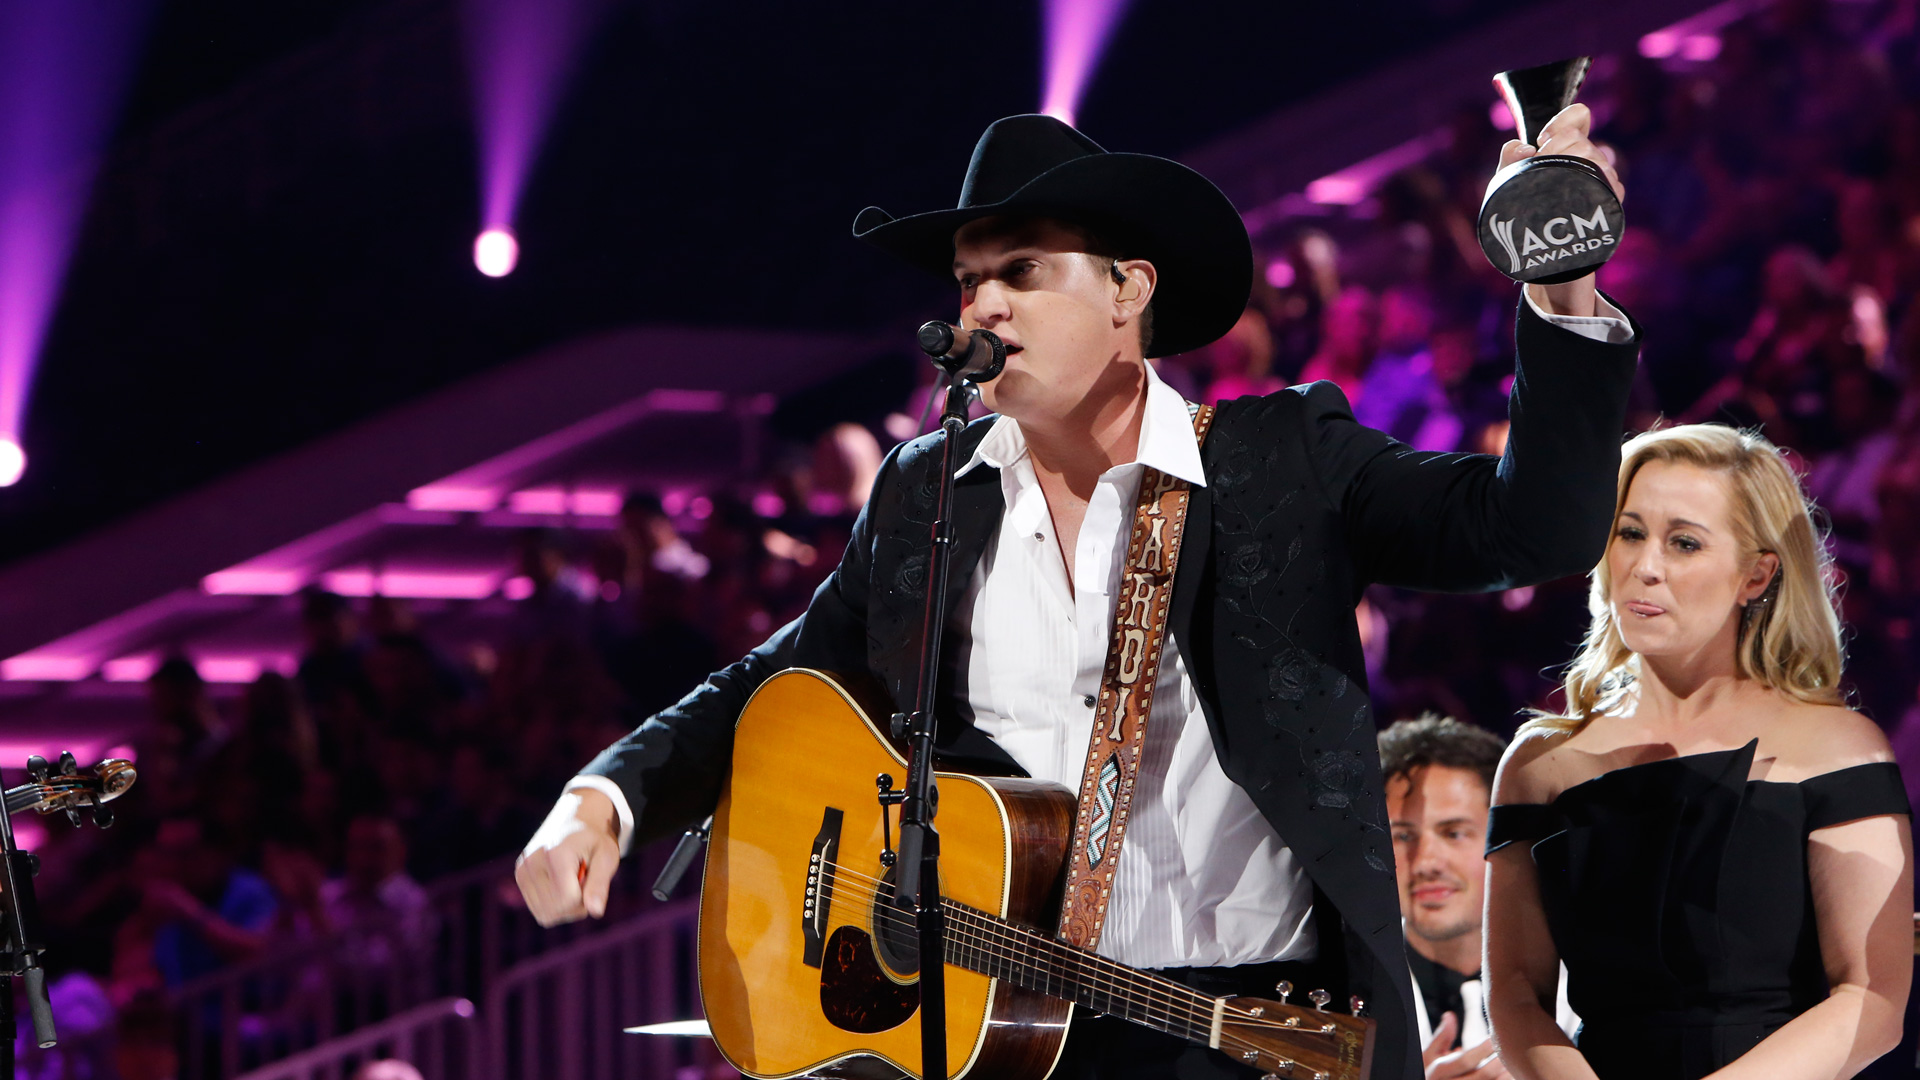 Jon Pardi wins New Male Vocalist Of The Year presented by T-Mobile at the 52nd ACM Awards